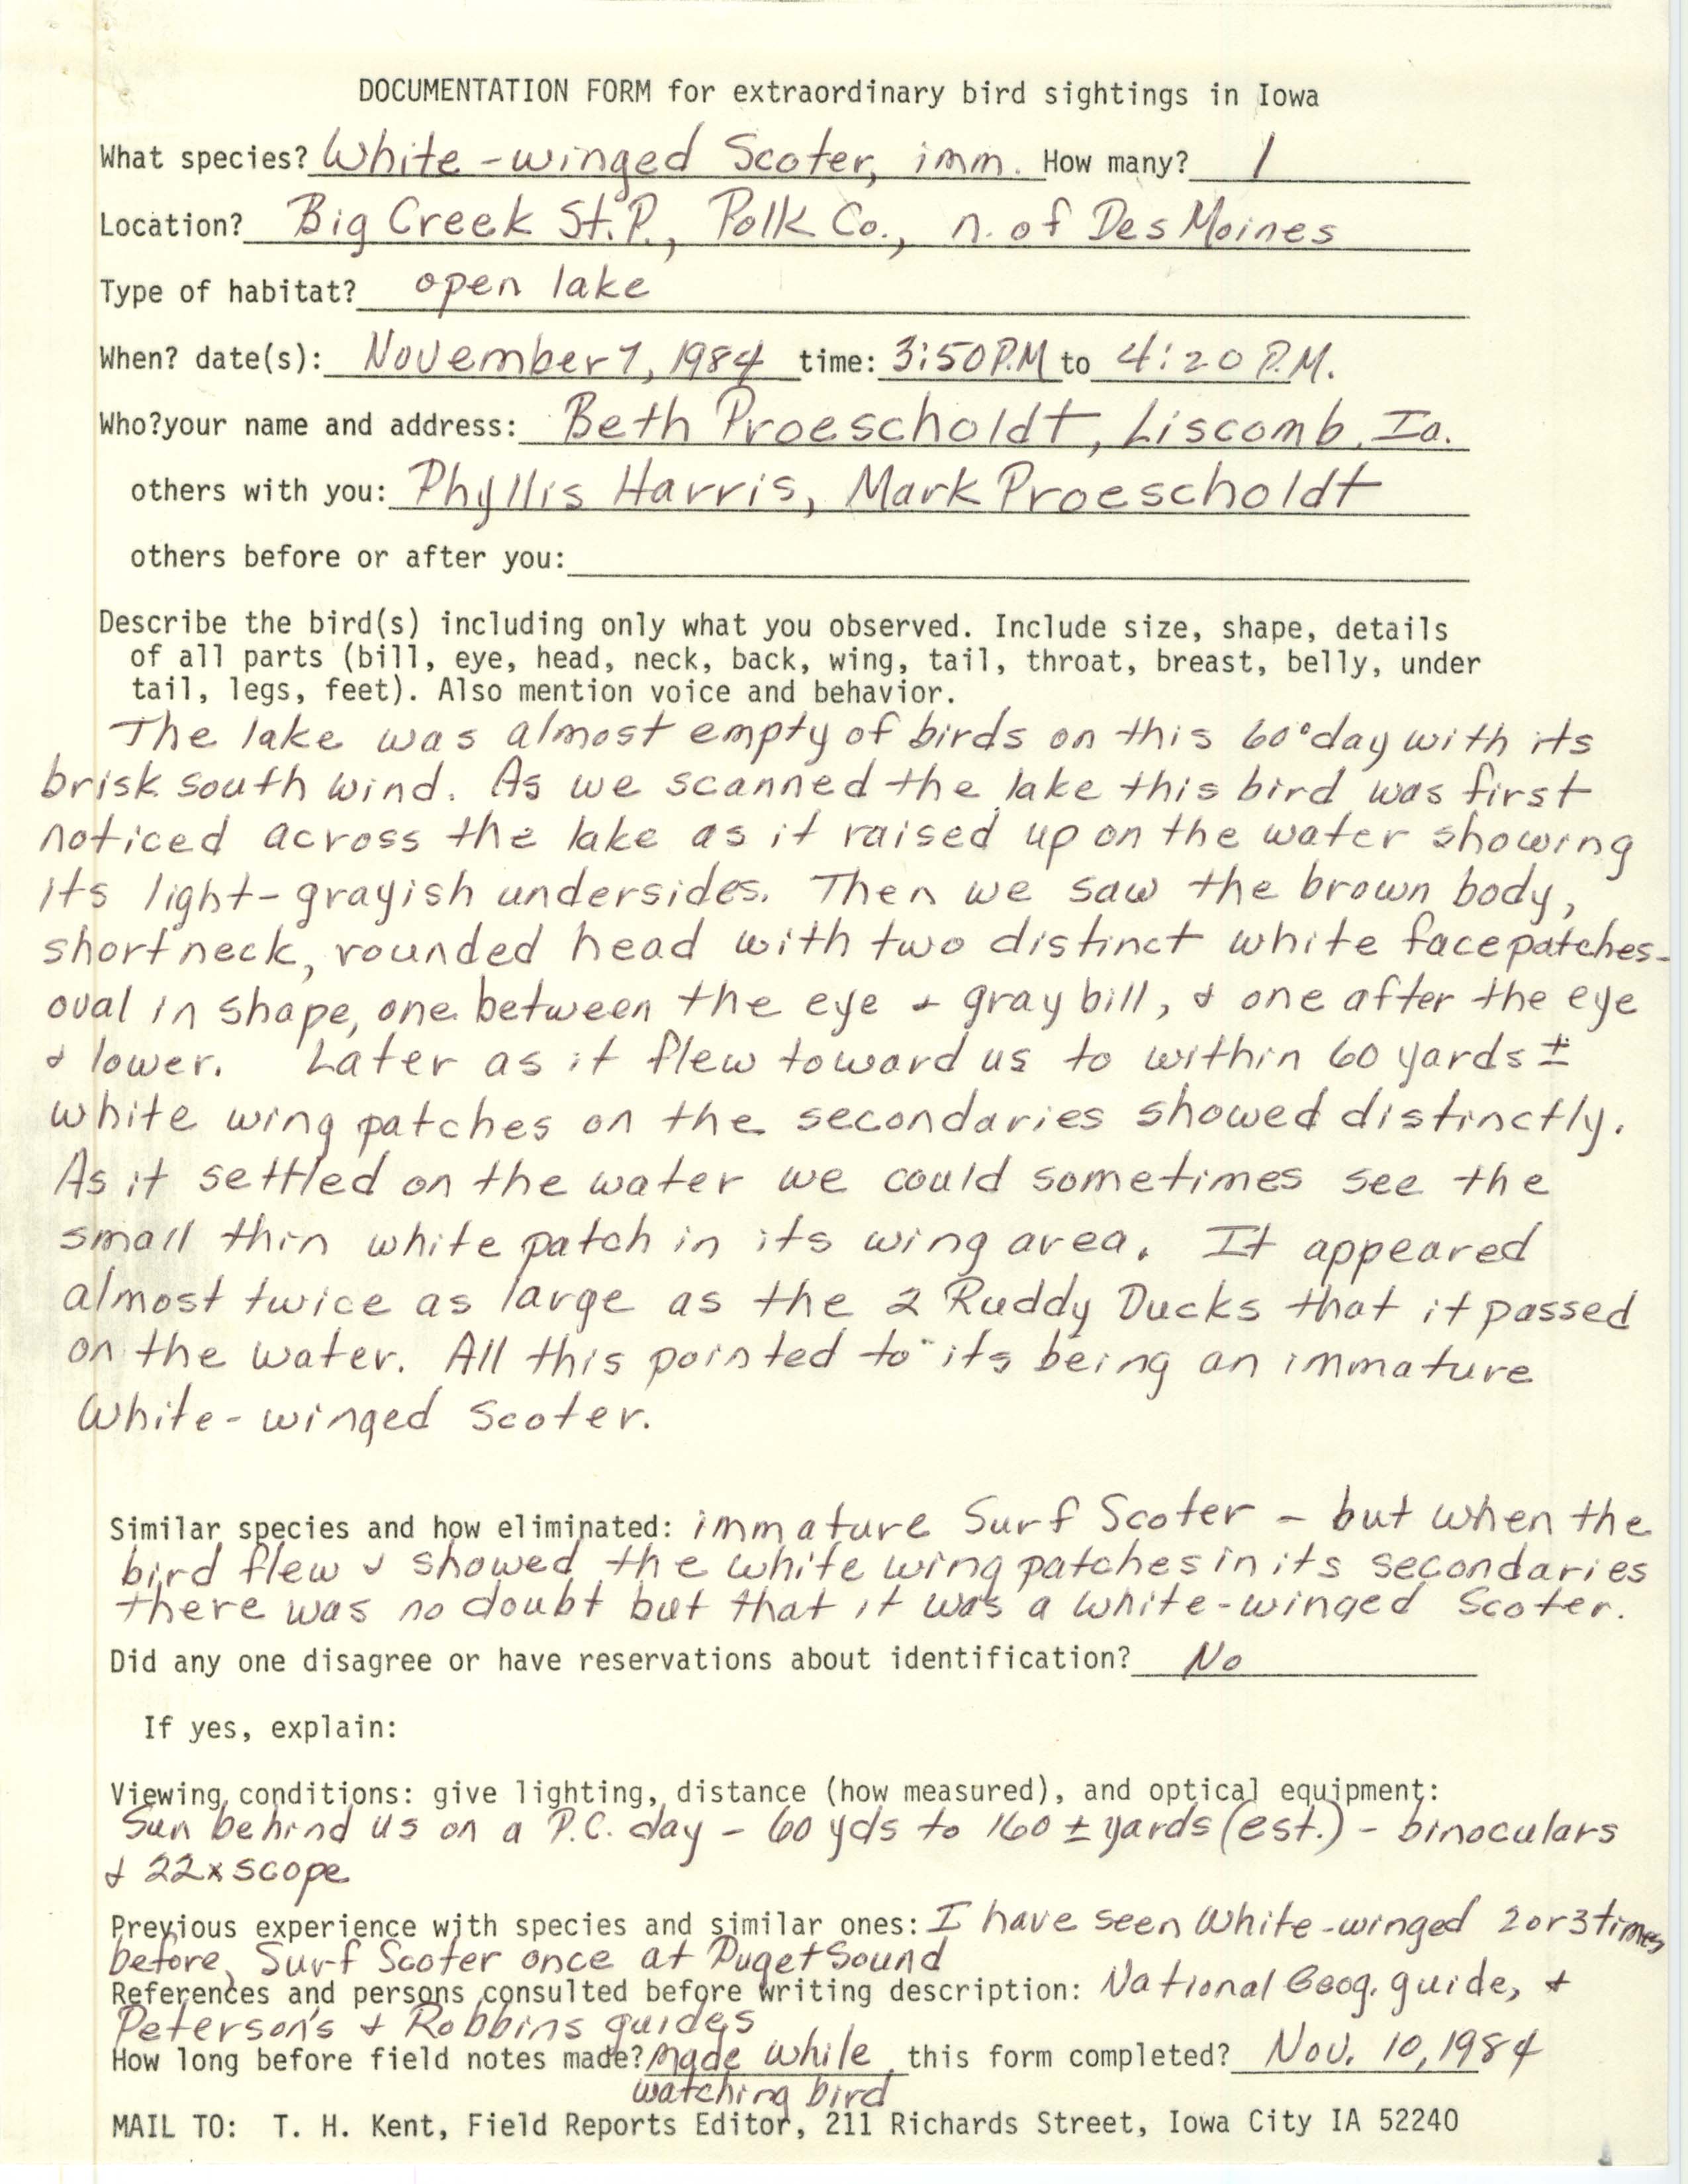 Rare bird documentation form for White-winged Scoter at Big Creek State Park, 1984